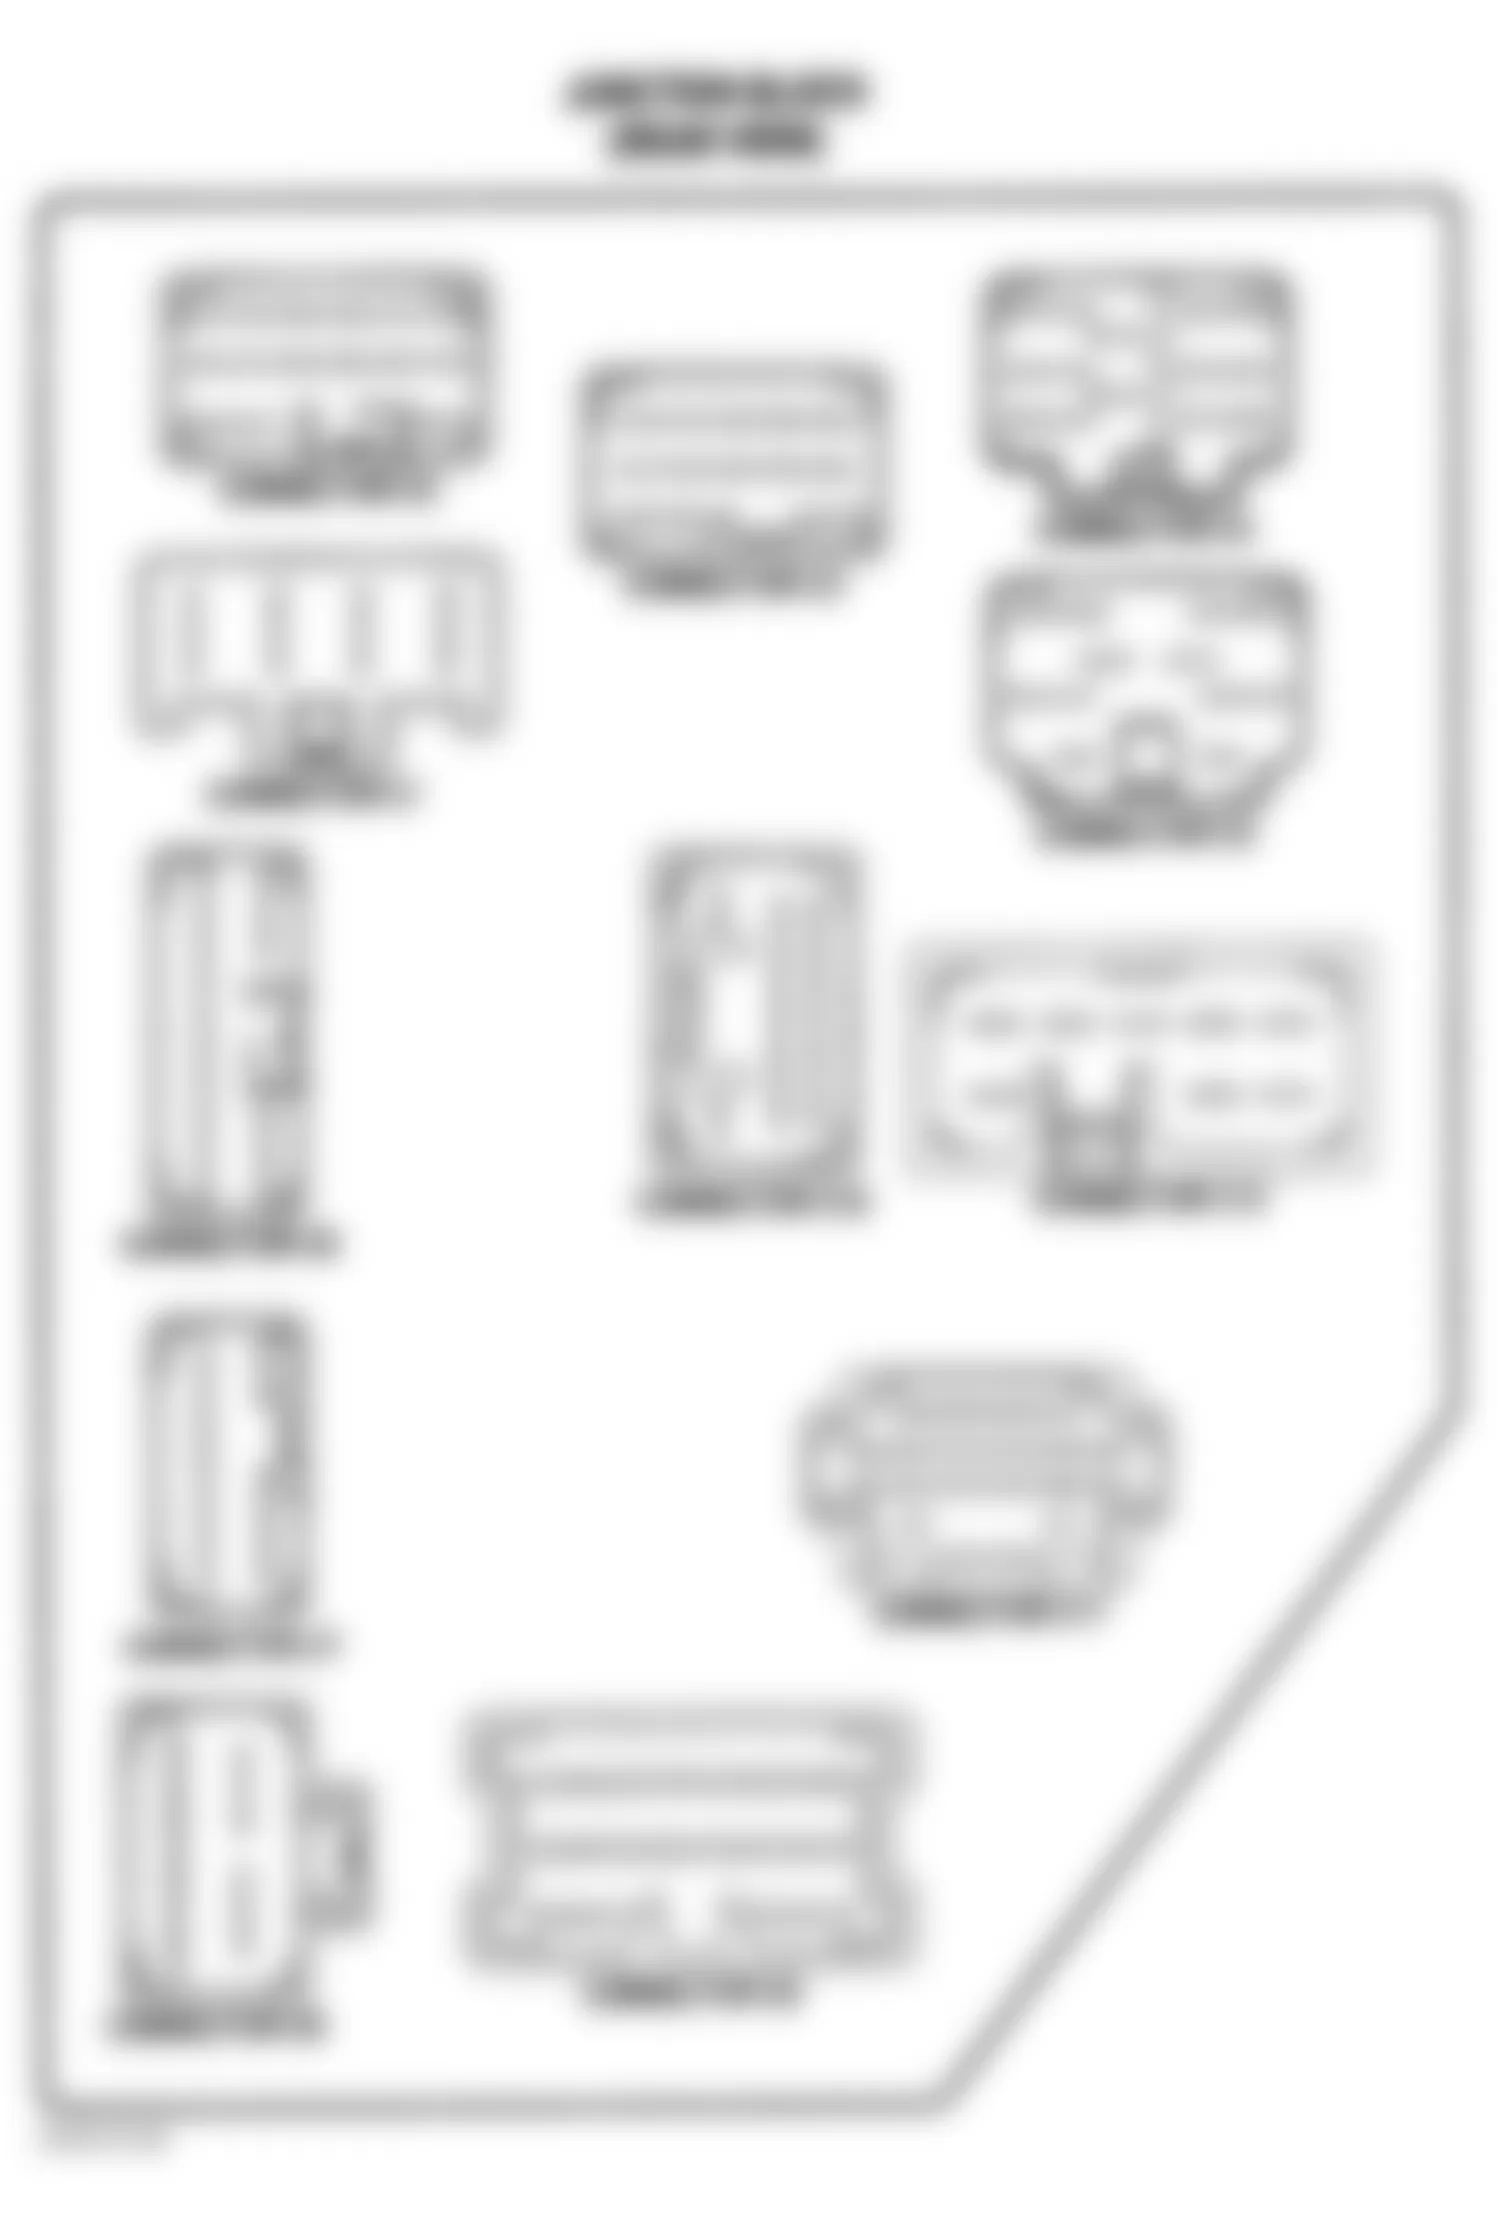 Dodge Durango 2003 - Component Locations -  Identifying Junction Block Components (Rear View)